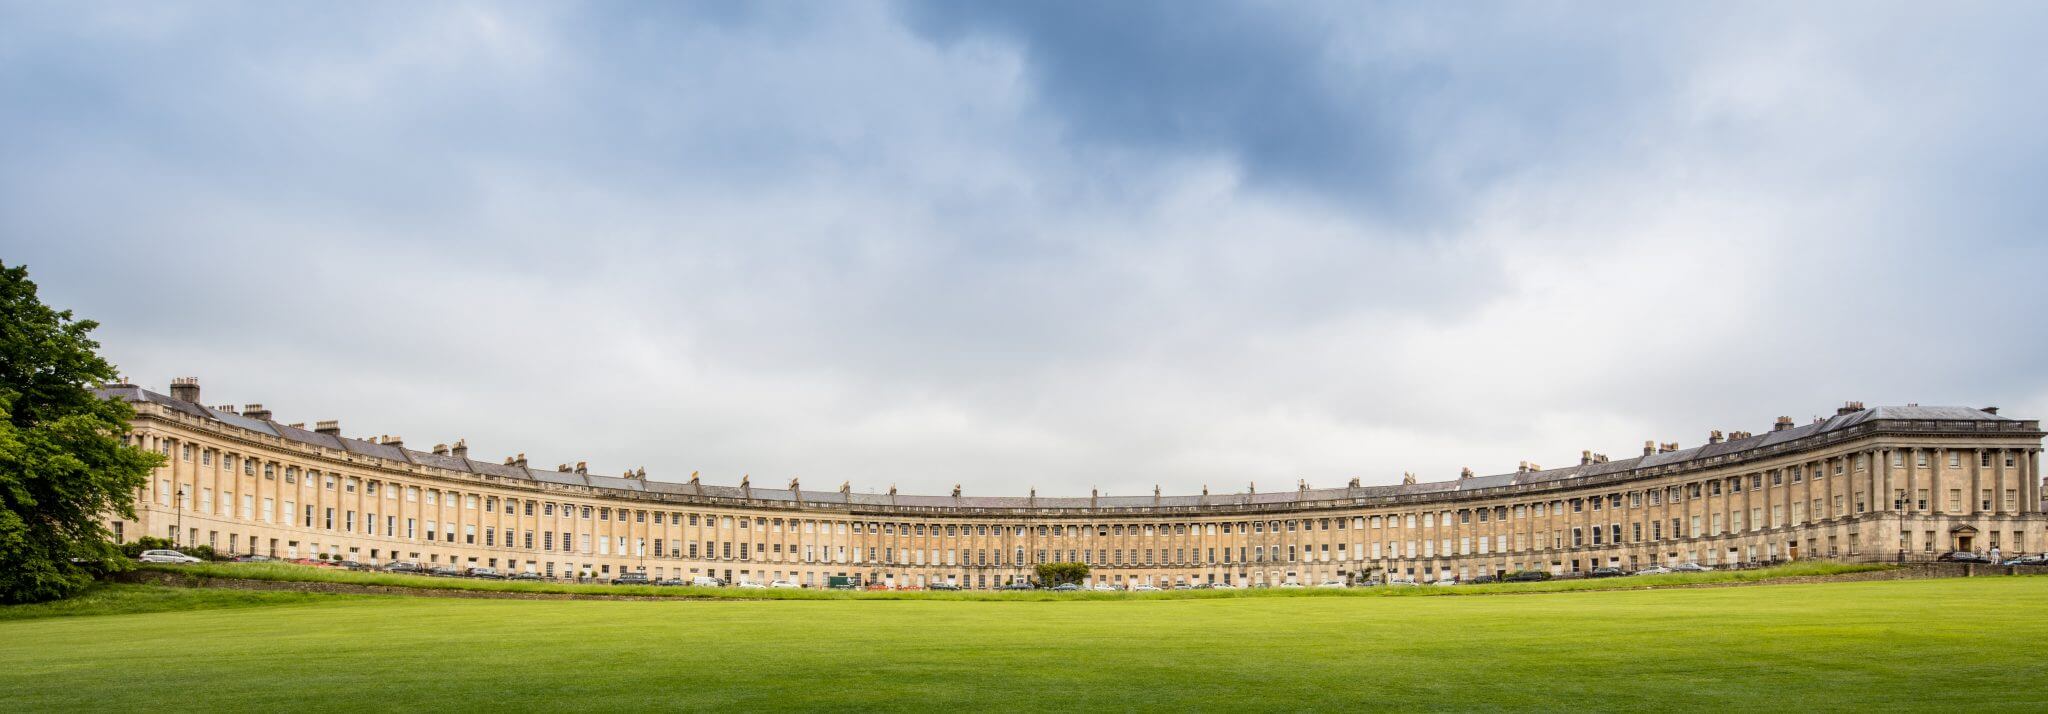 24 hours in bath